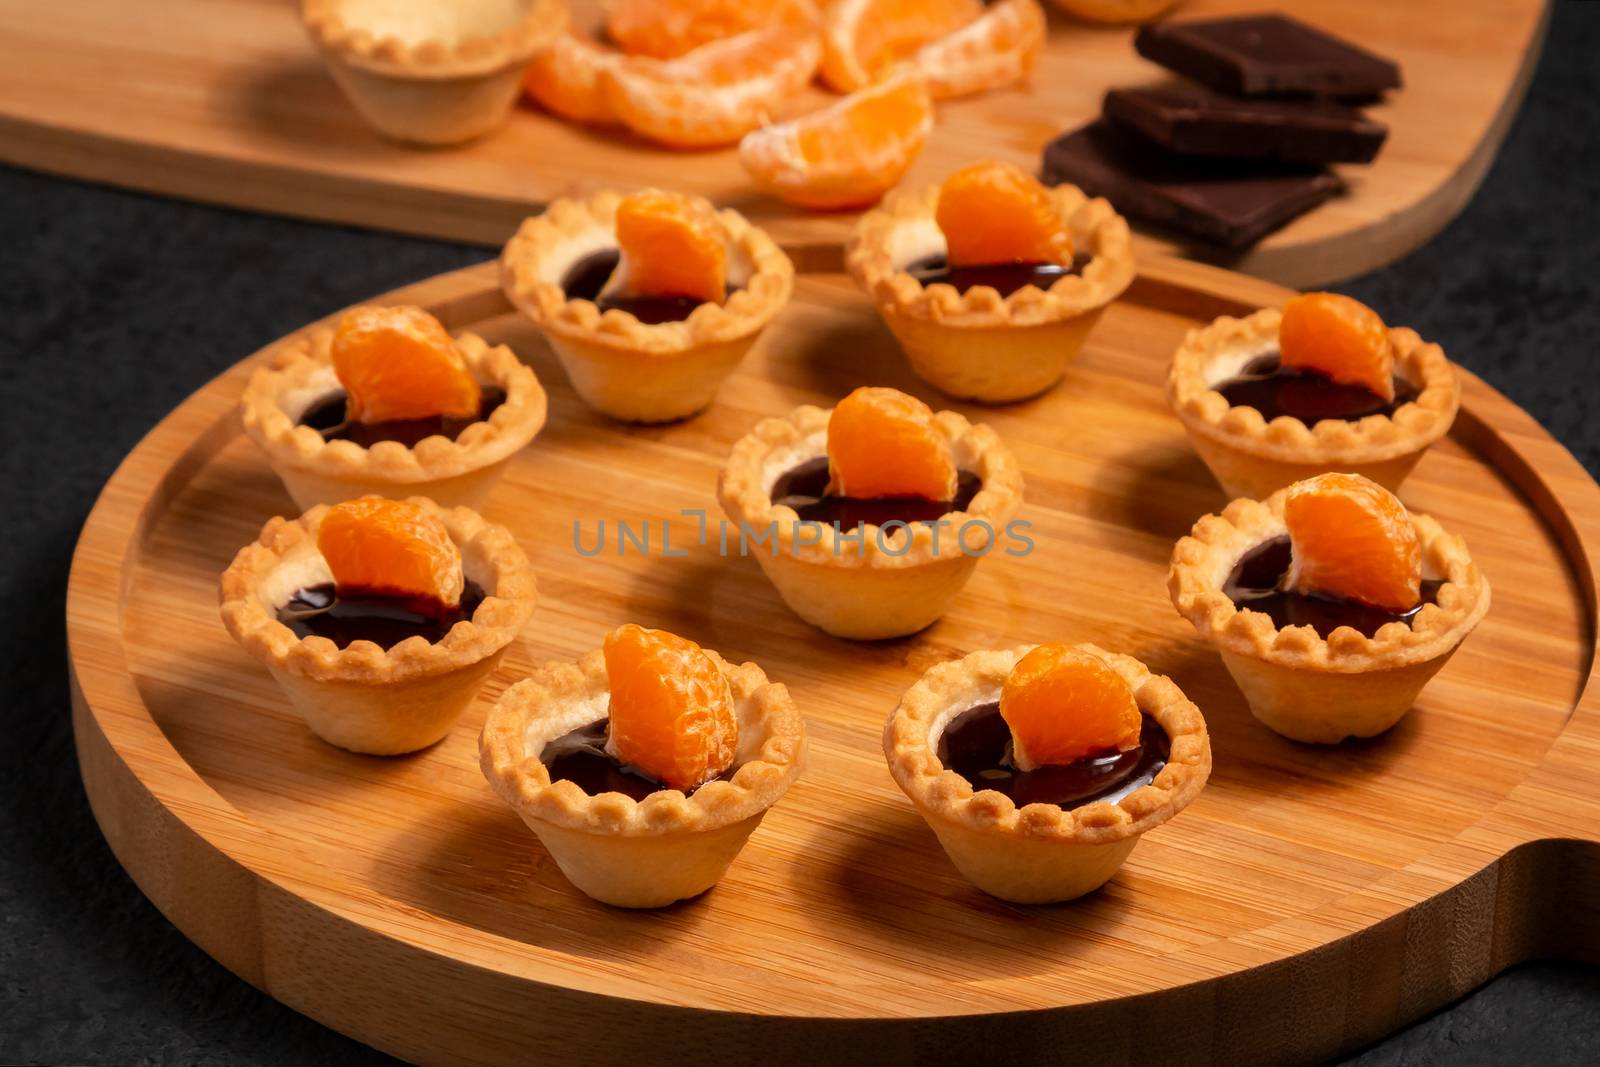 Sweet tartlets with chocolate and slices of tangerine on a wooden dish for serving by galsand